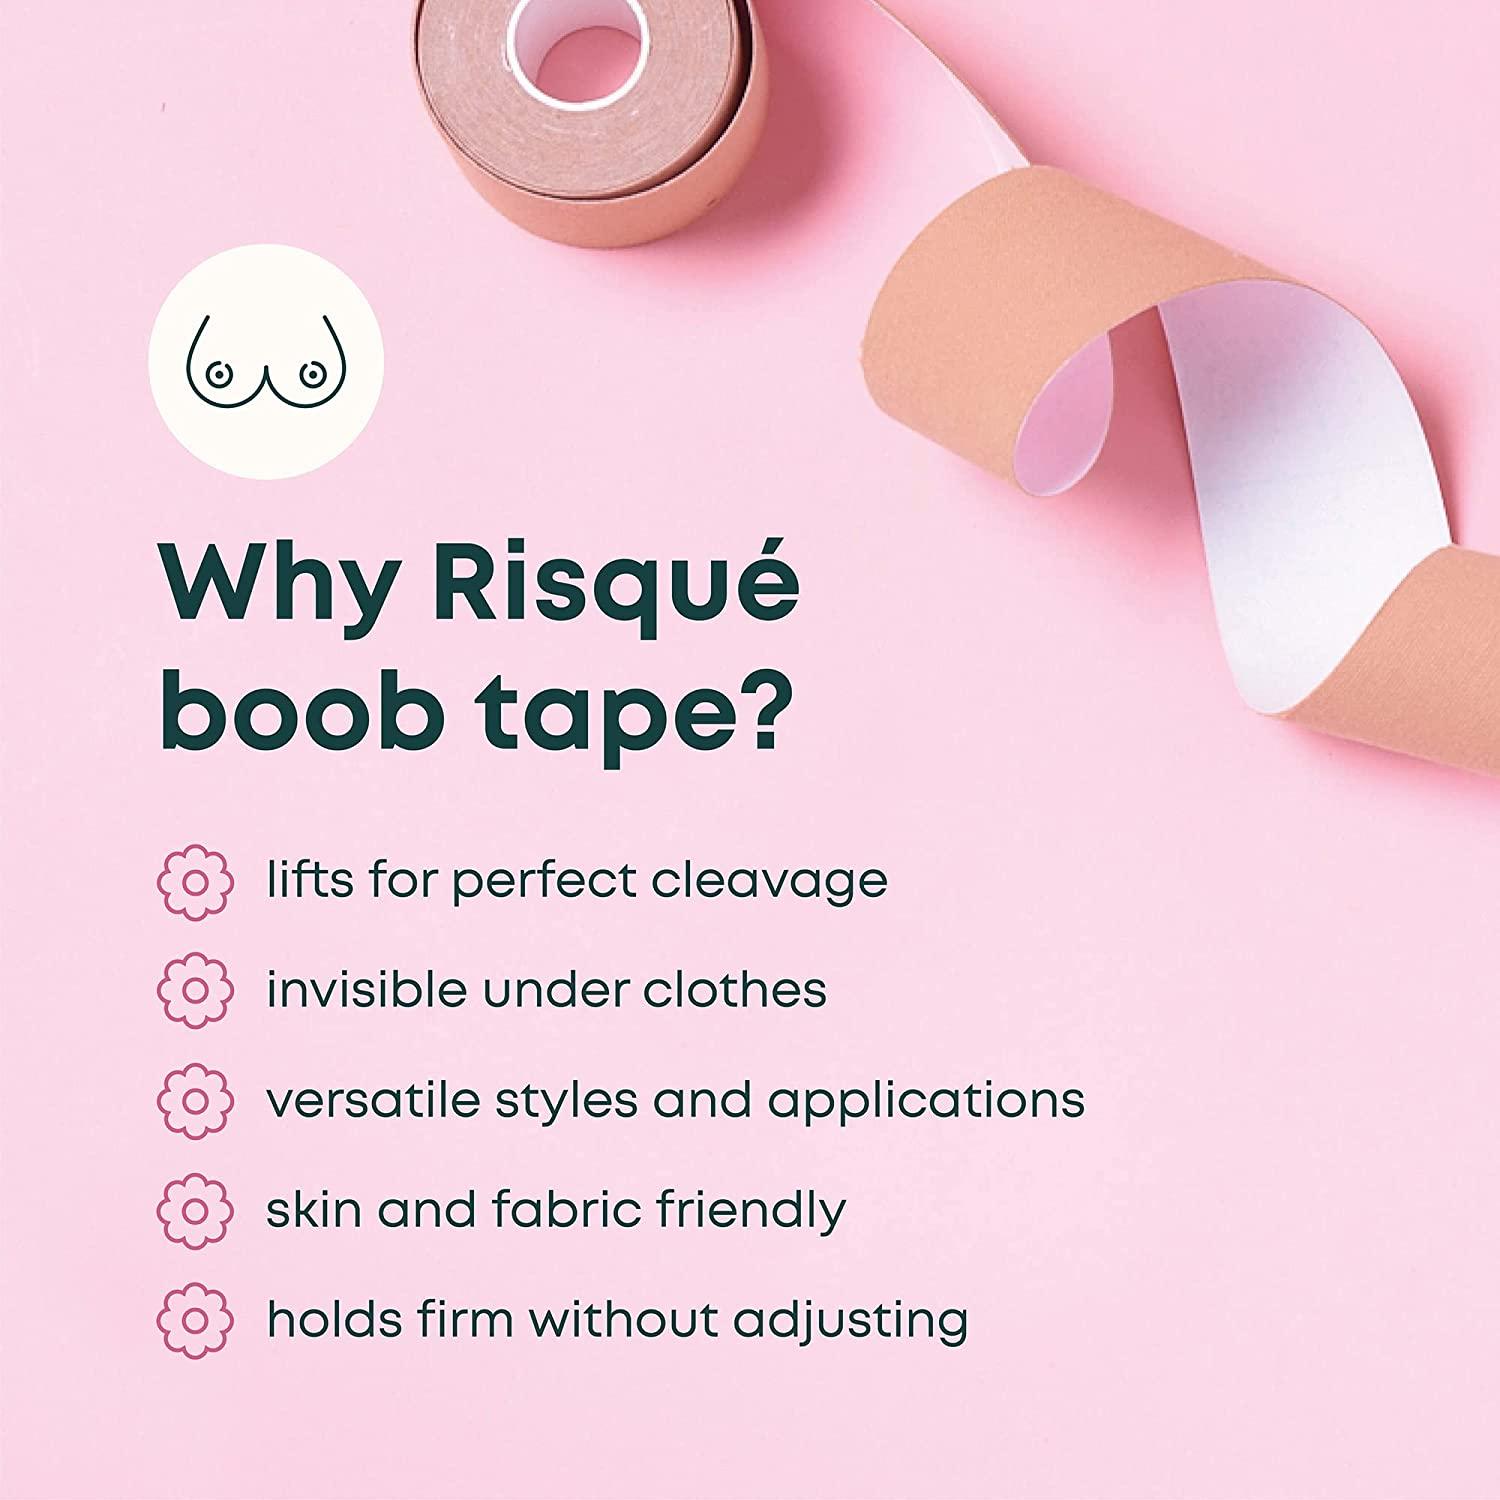 Risque Double Sided Fashion Tape - Fabric and Skin Friendly, No